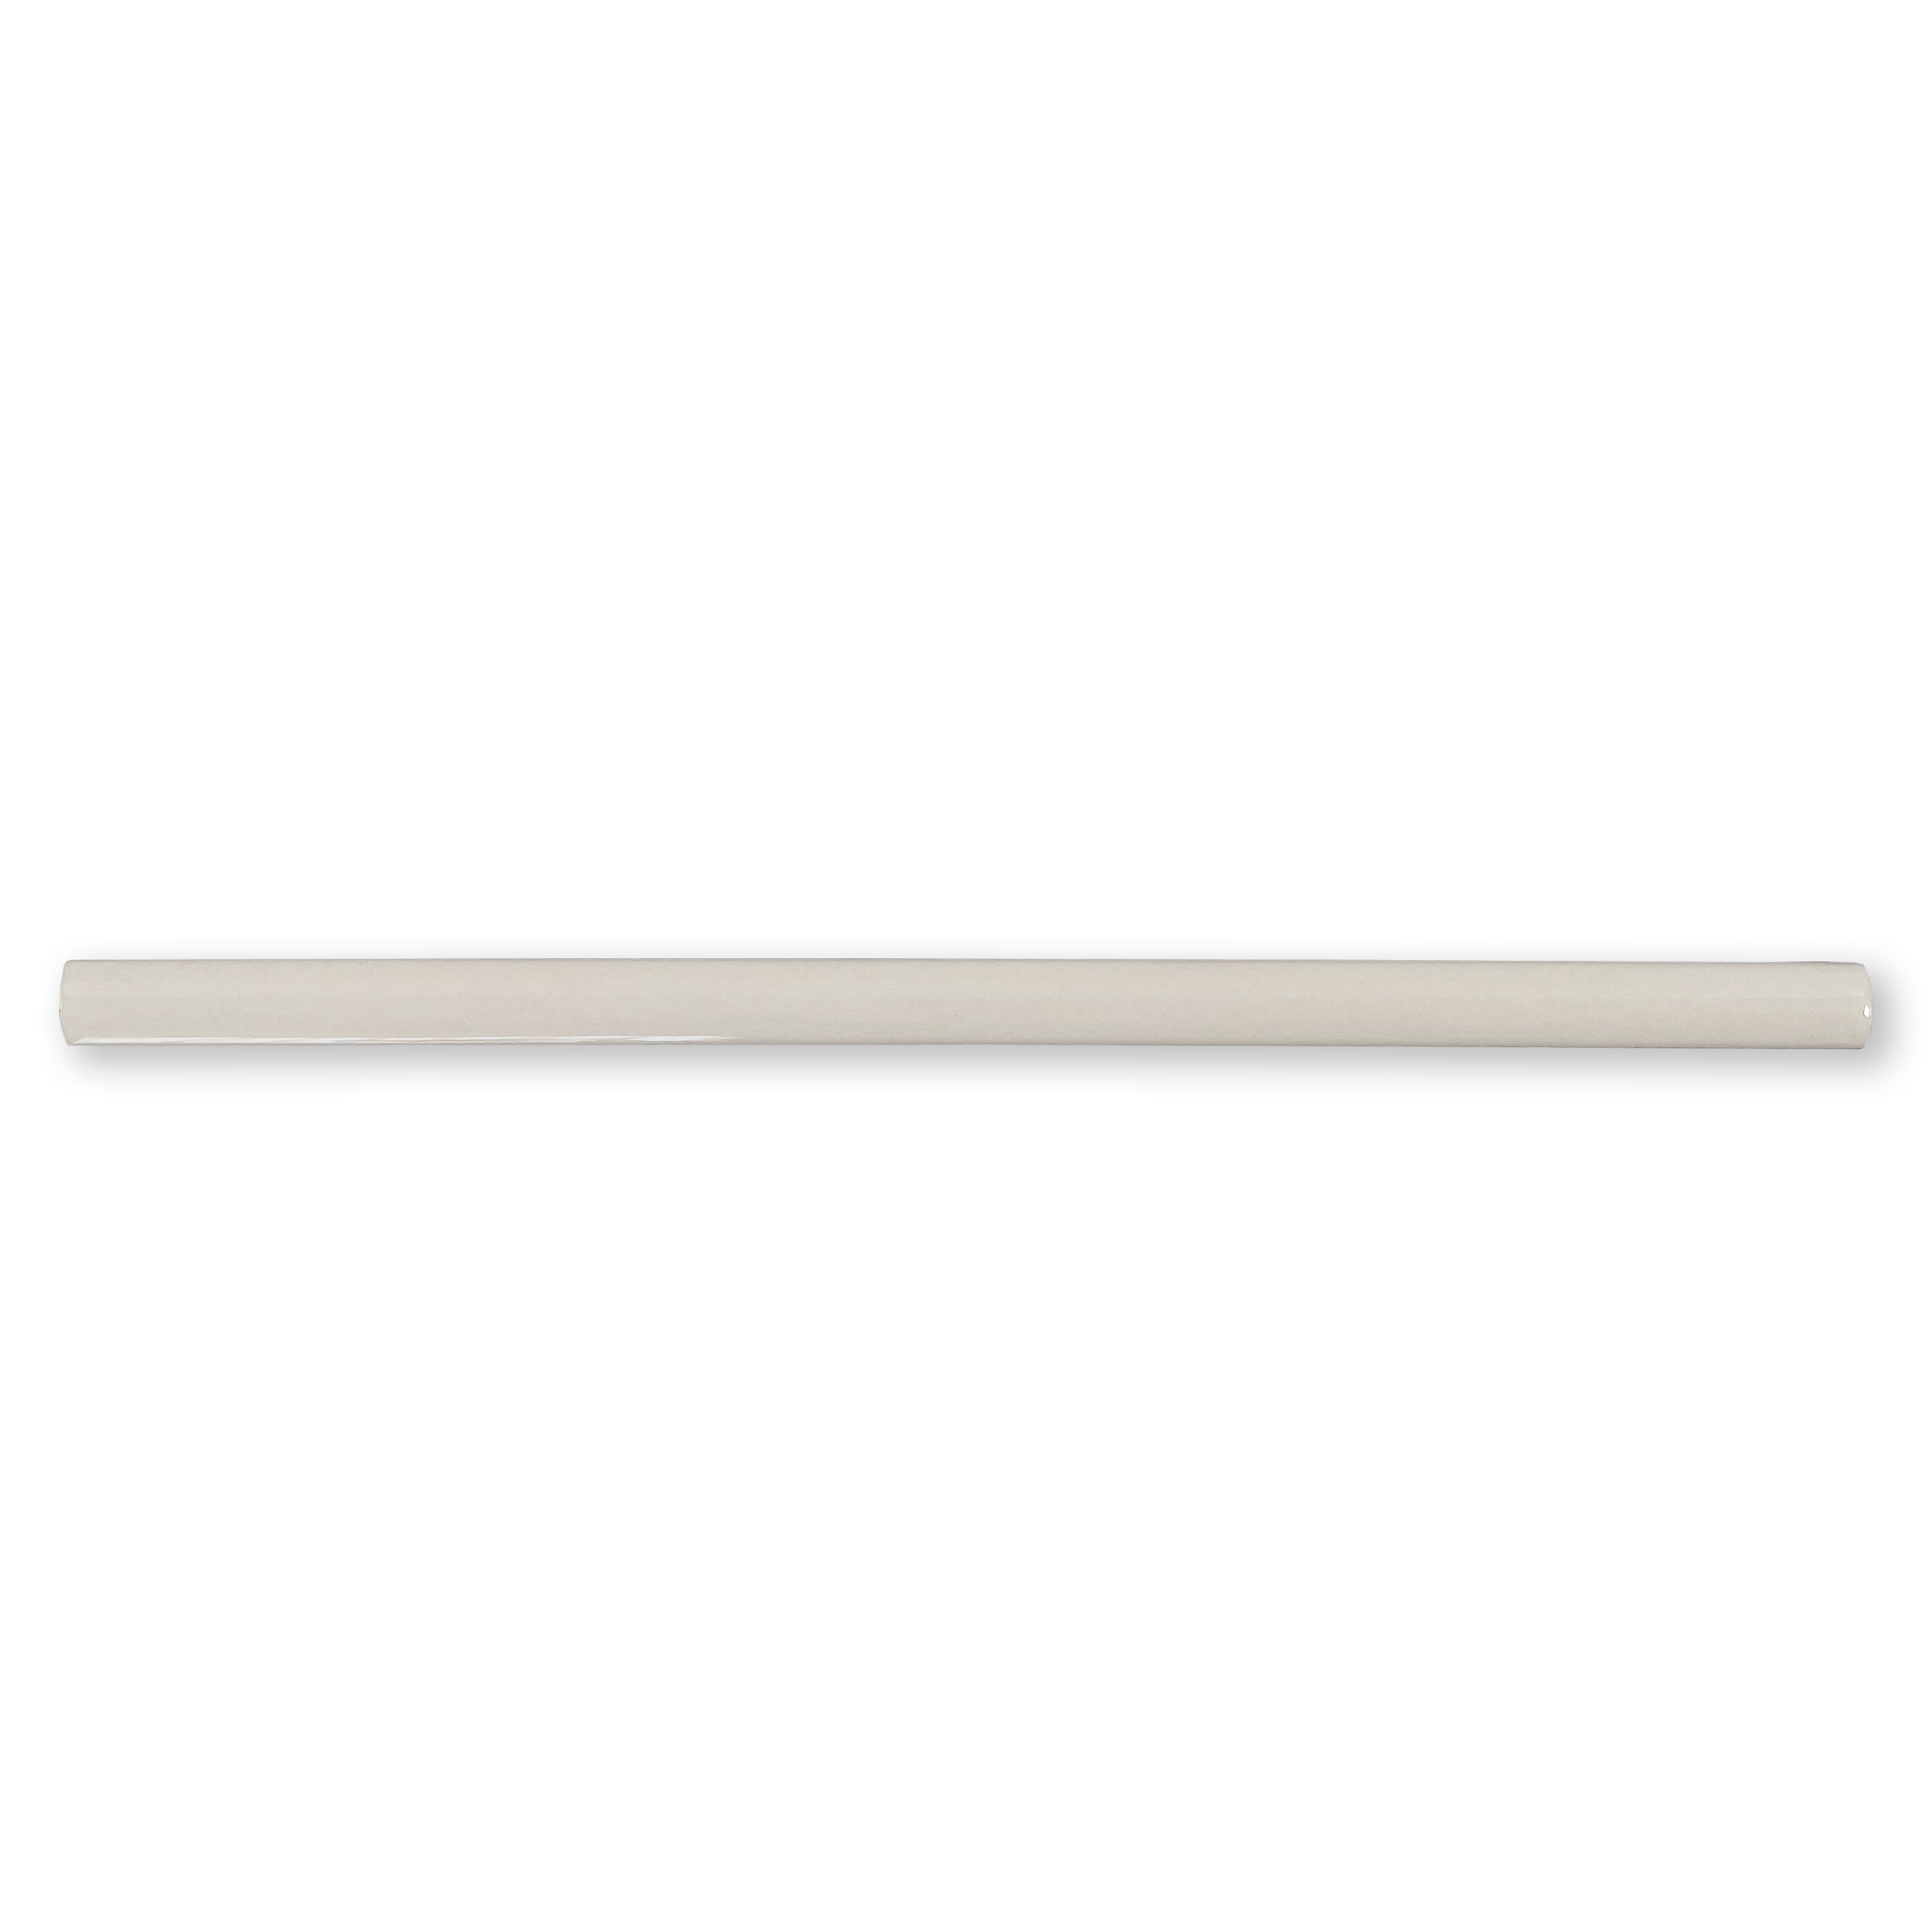 Extruded Pearl White Glossy Pencil - 1⁄2X12